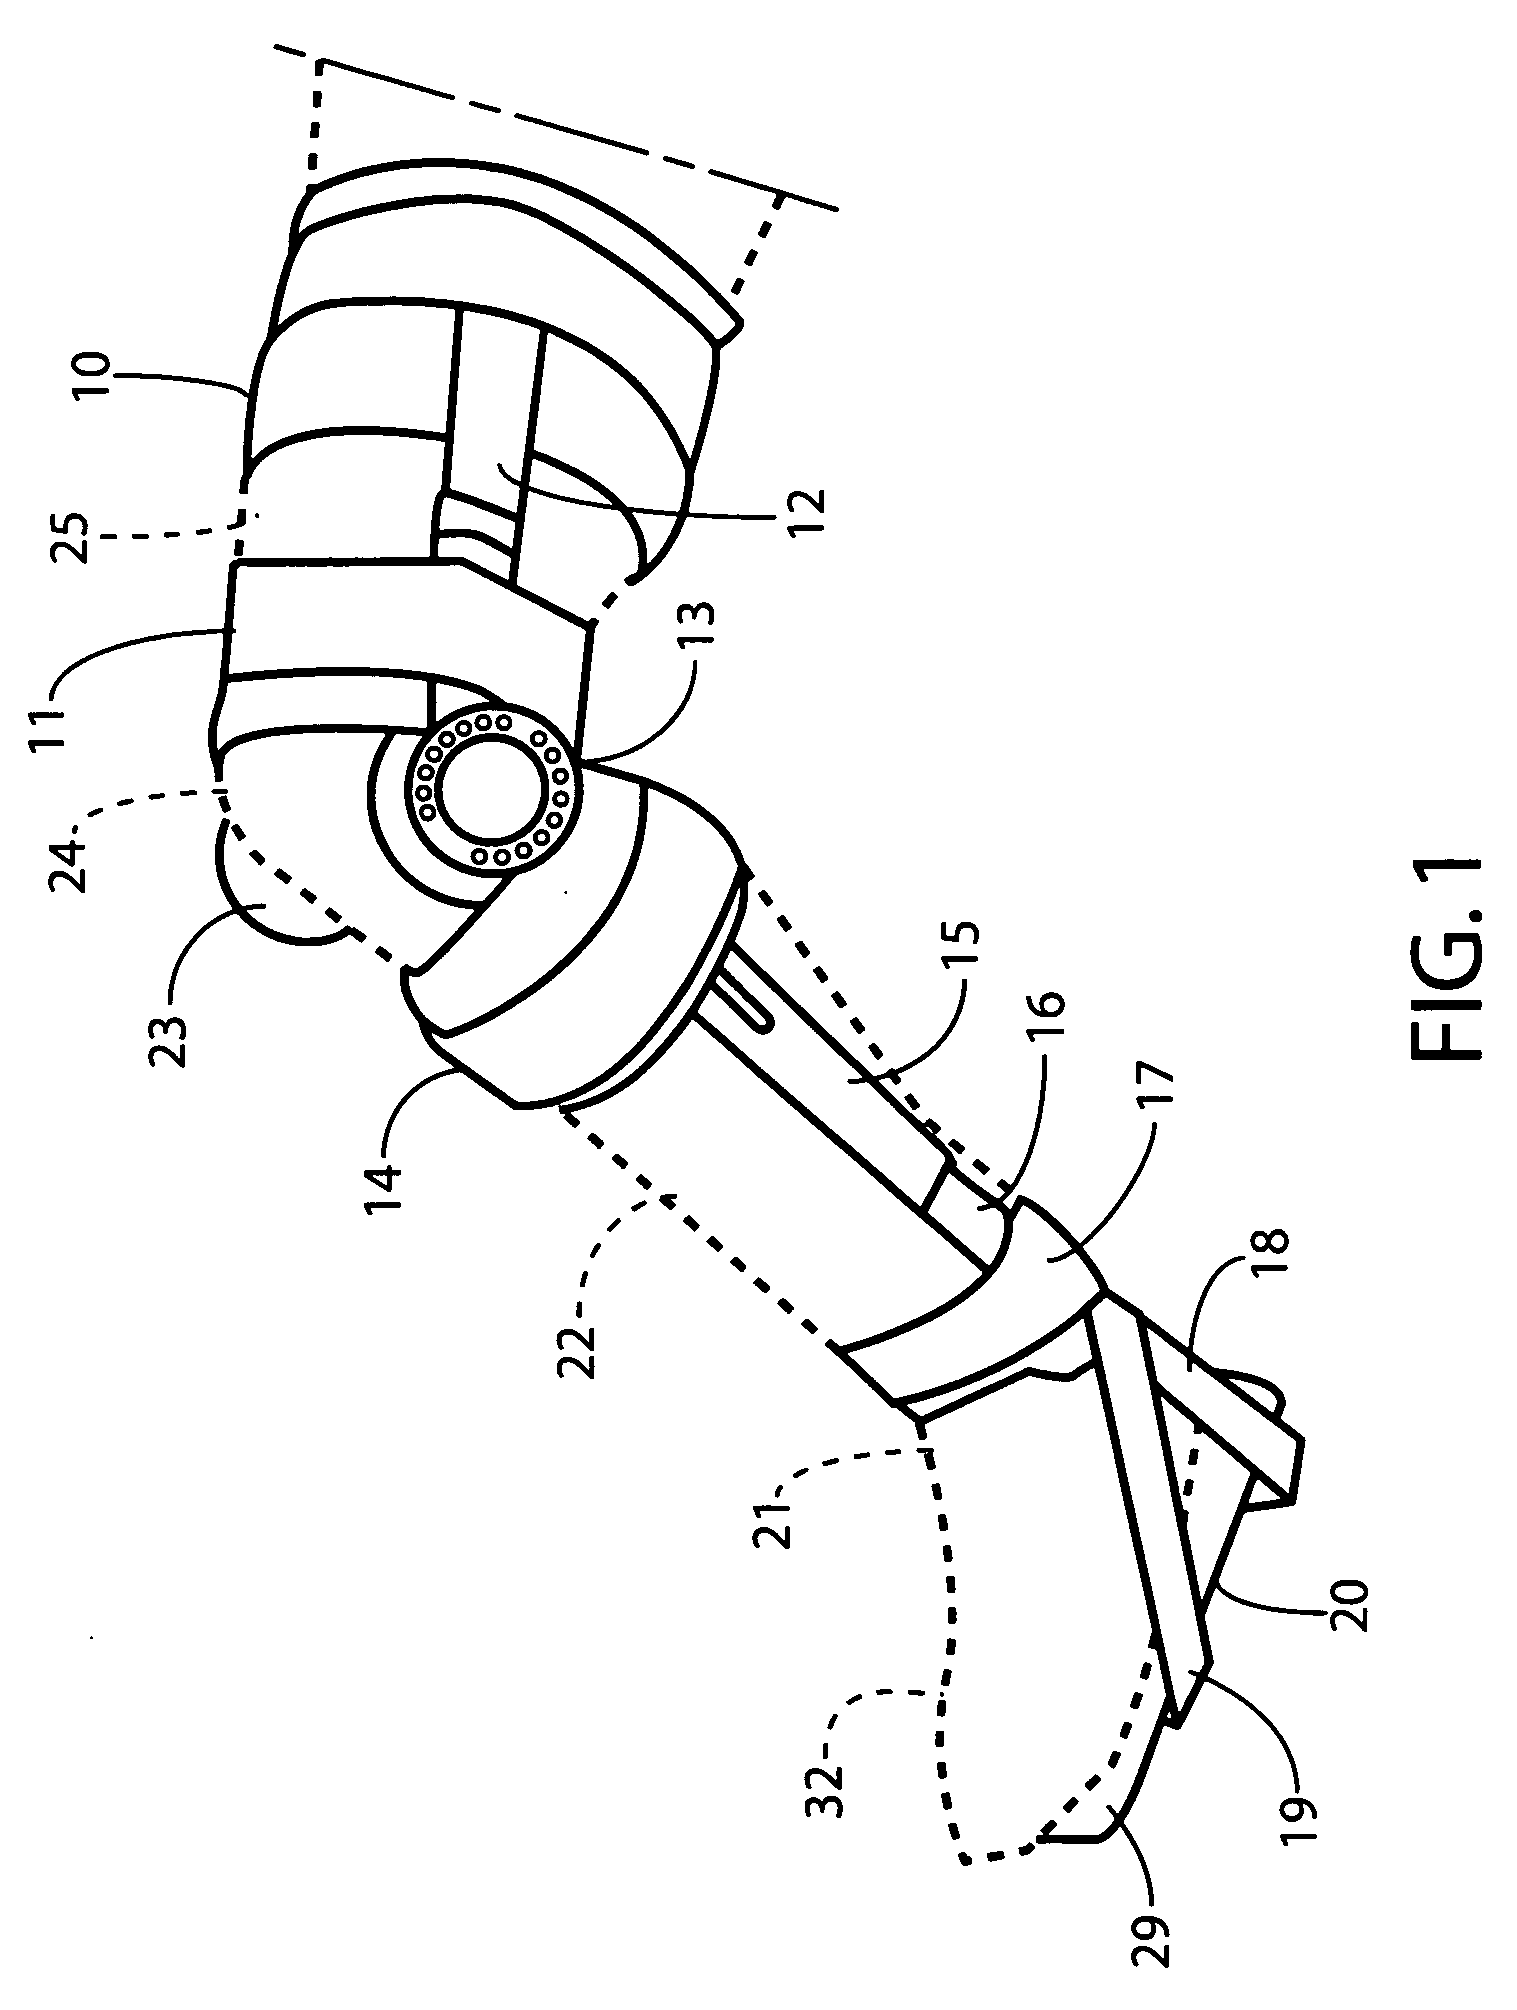 Apparatus for isolating an injured ankle or foot during aerobic exercise